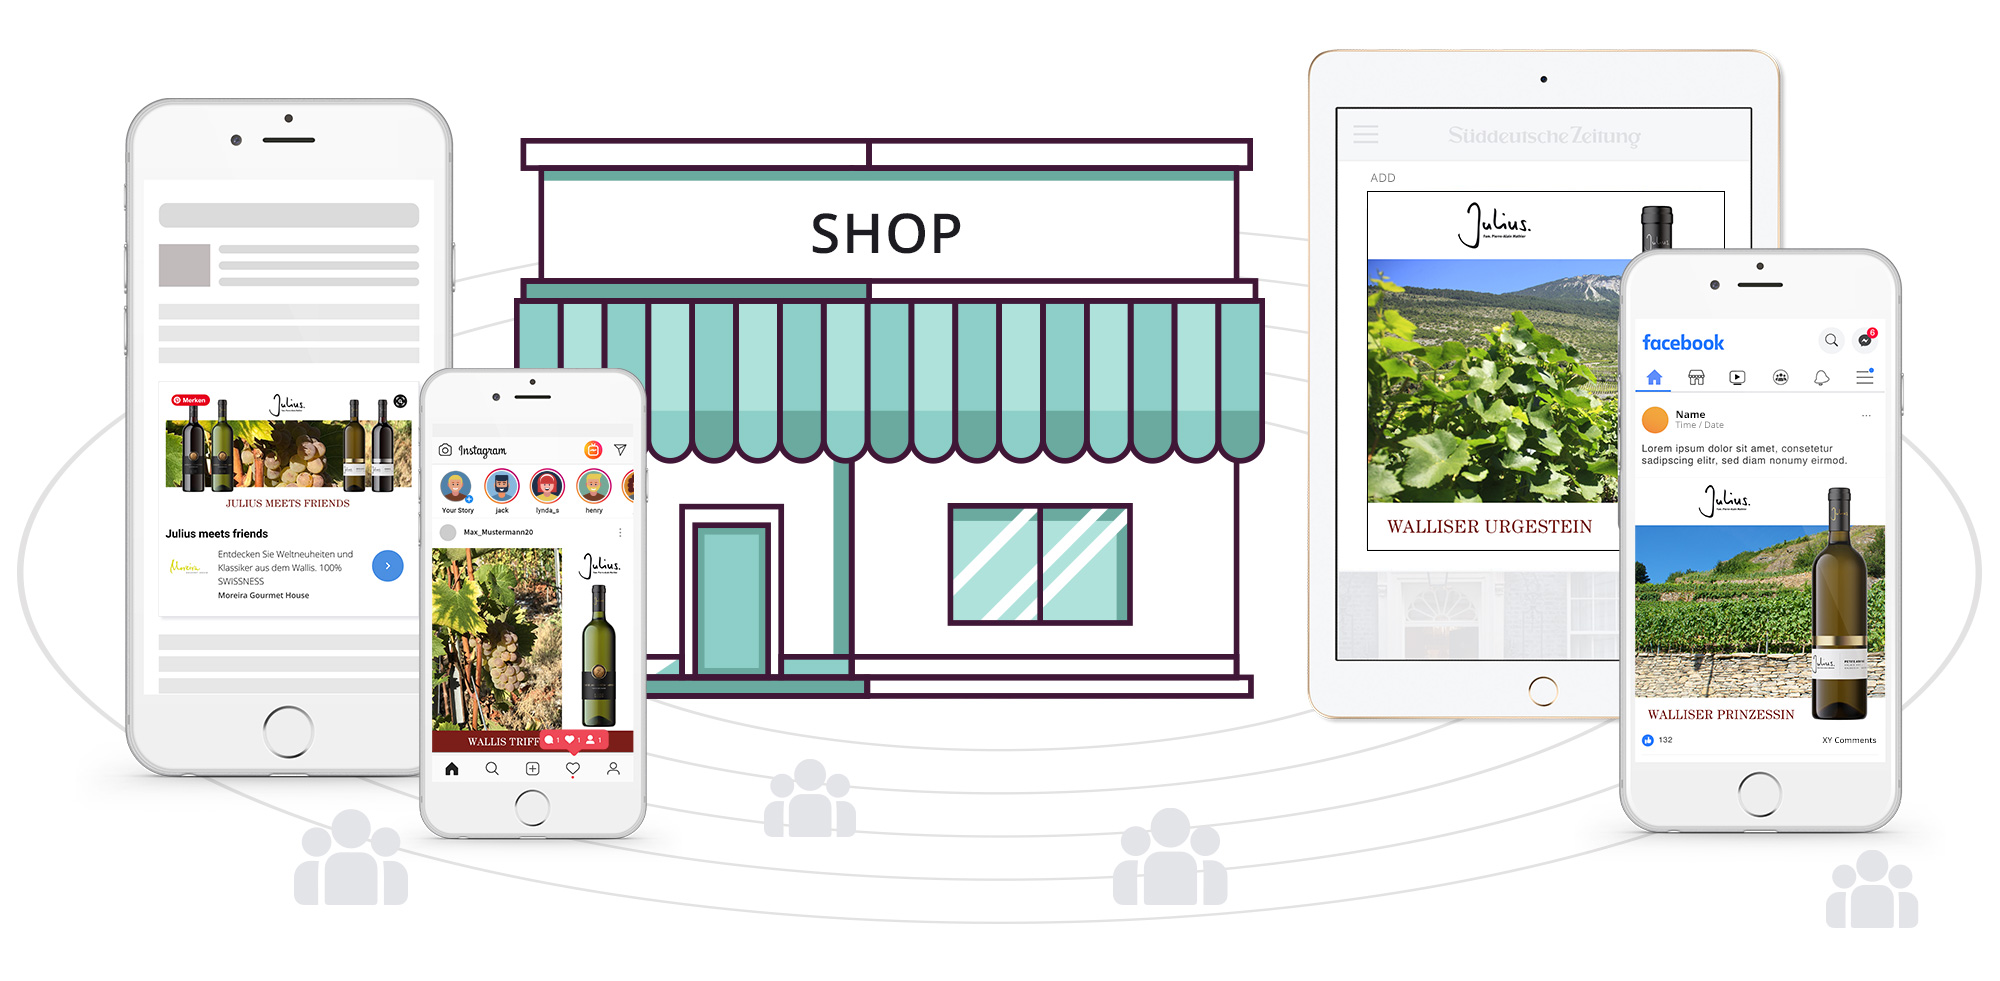 This way, retailers can reach their local target group online - simply and without any special marketing knowledge!